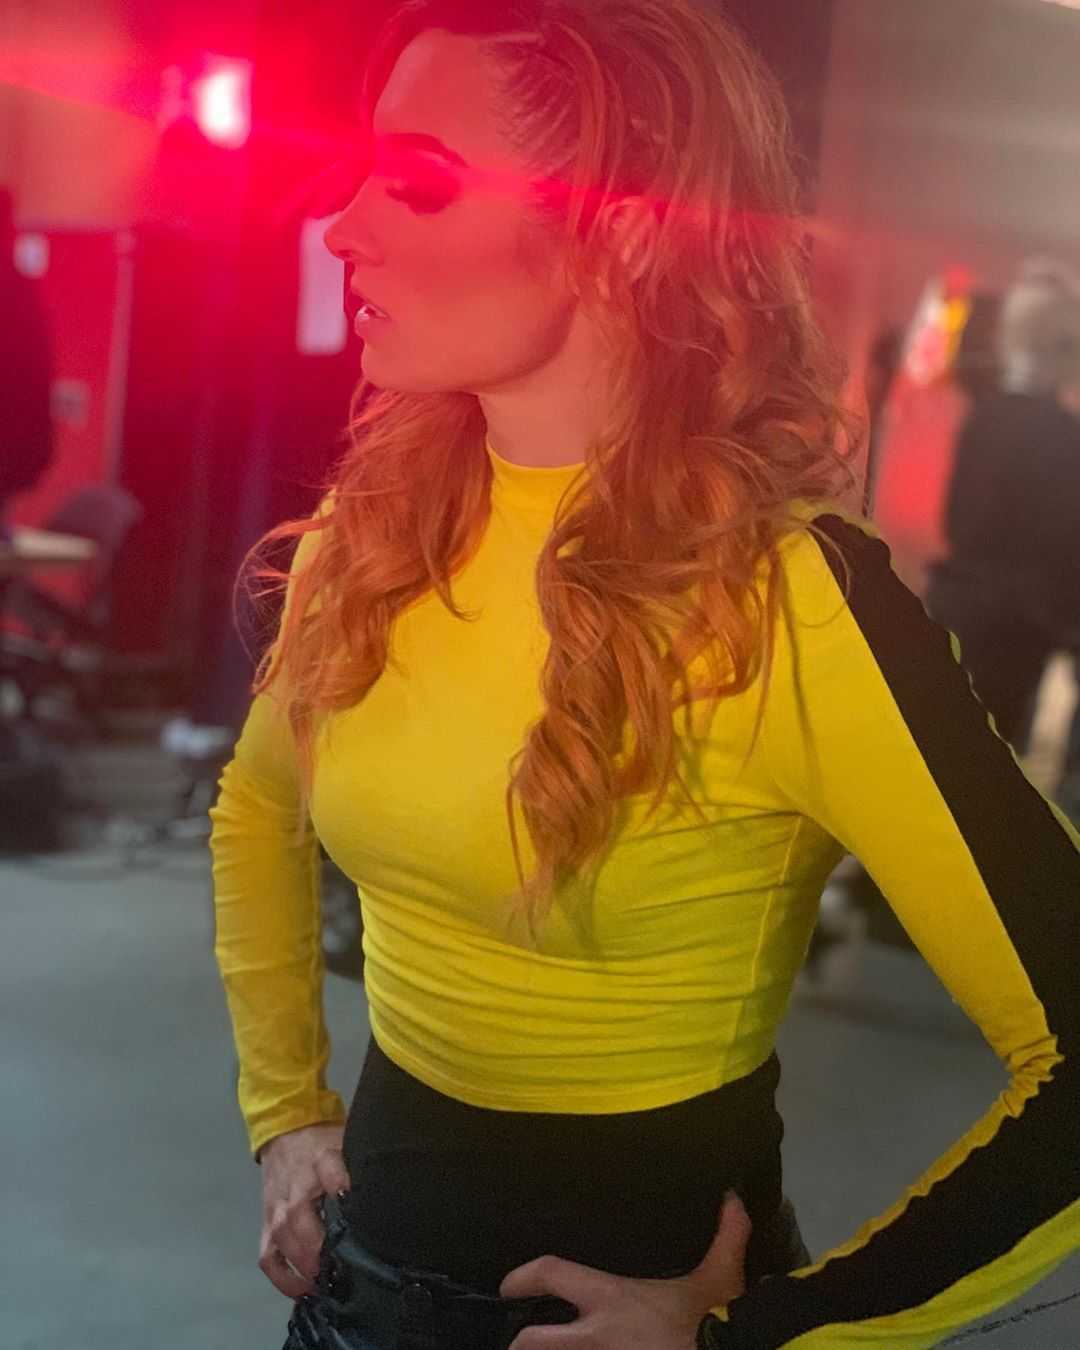 70+ Hot And Sexy Pictures of Becky Lynch – WWE Diva Will Sizzle You Up 110